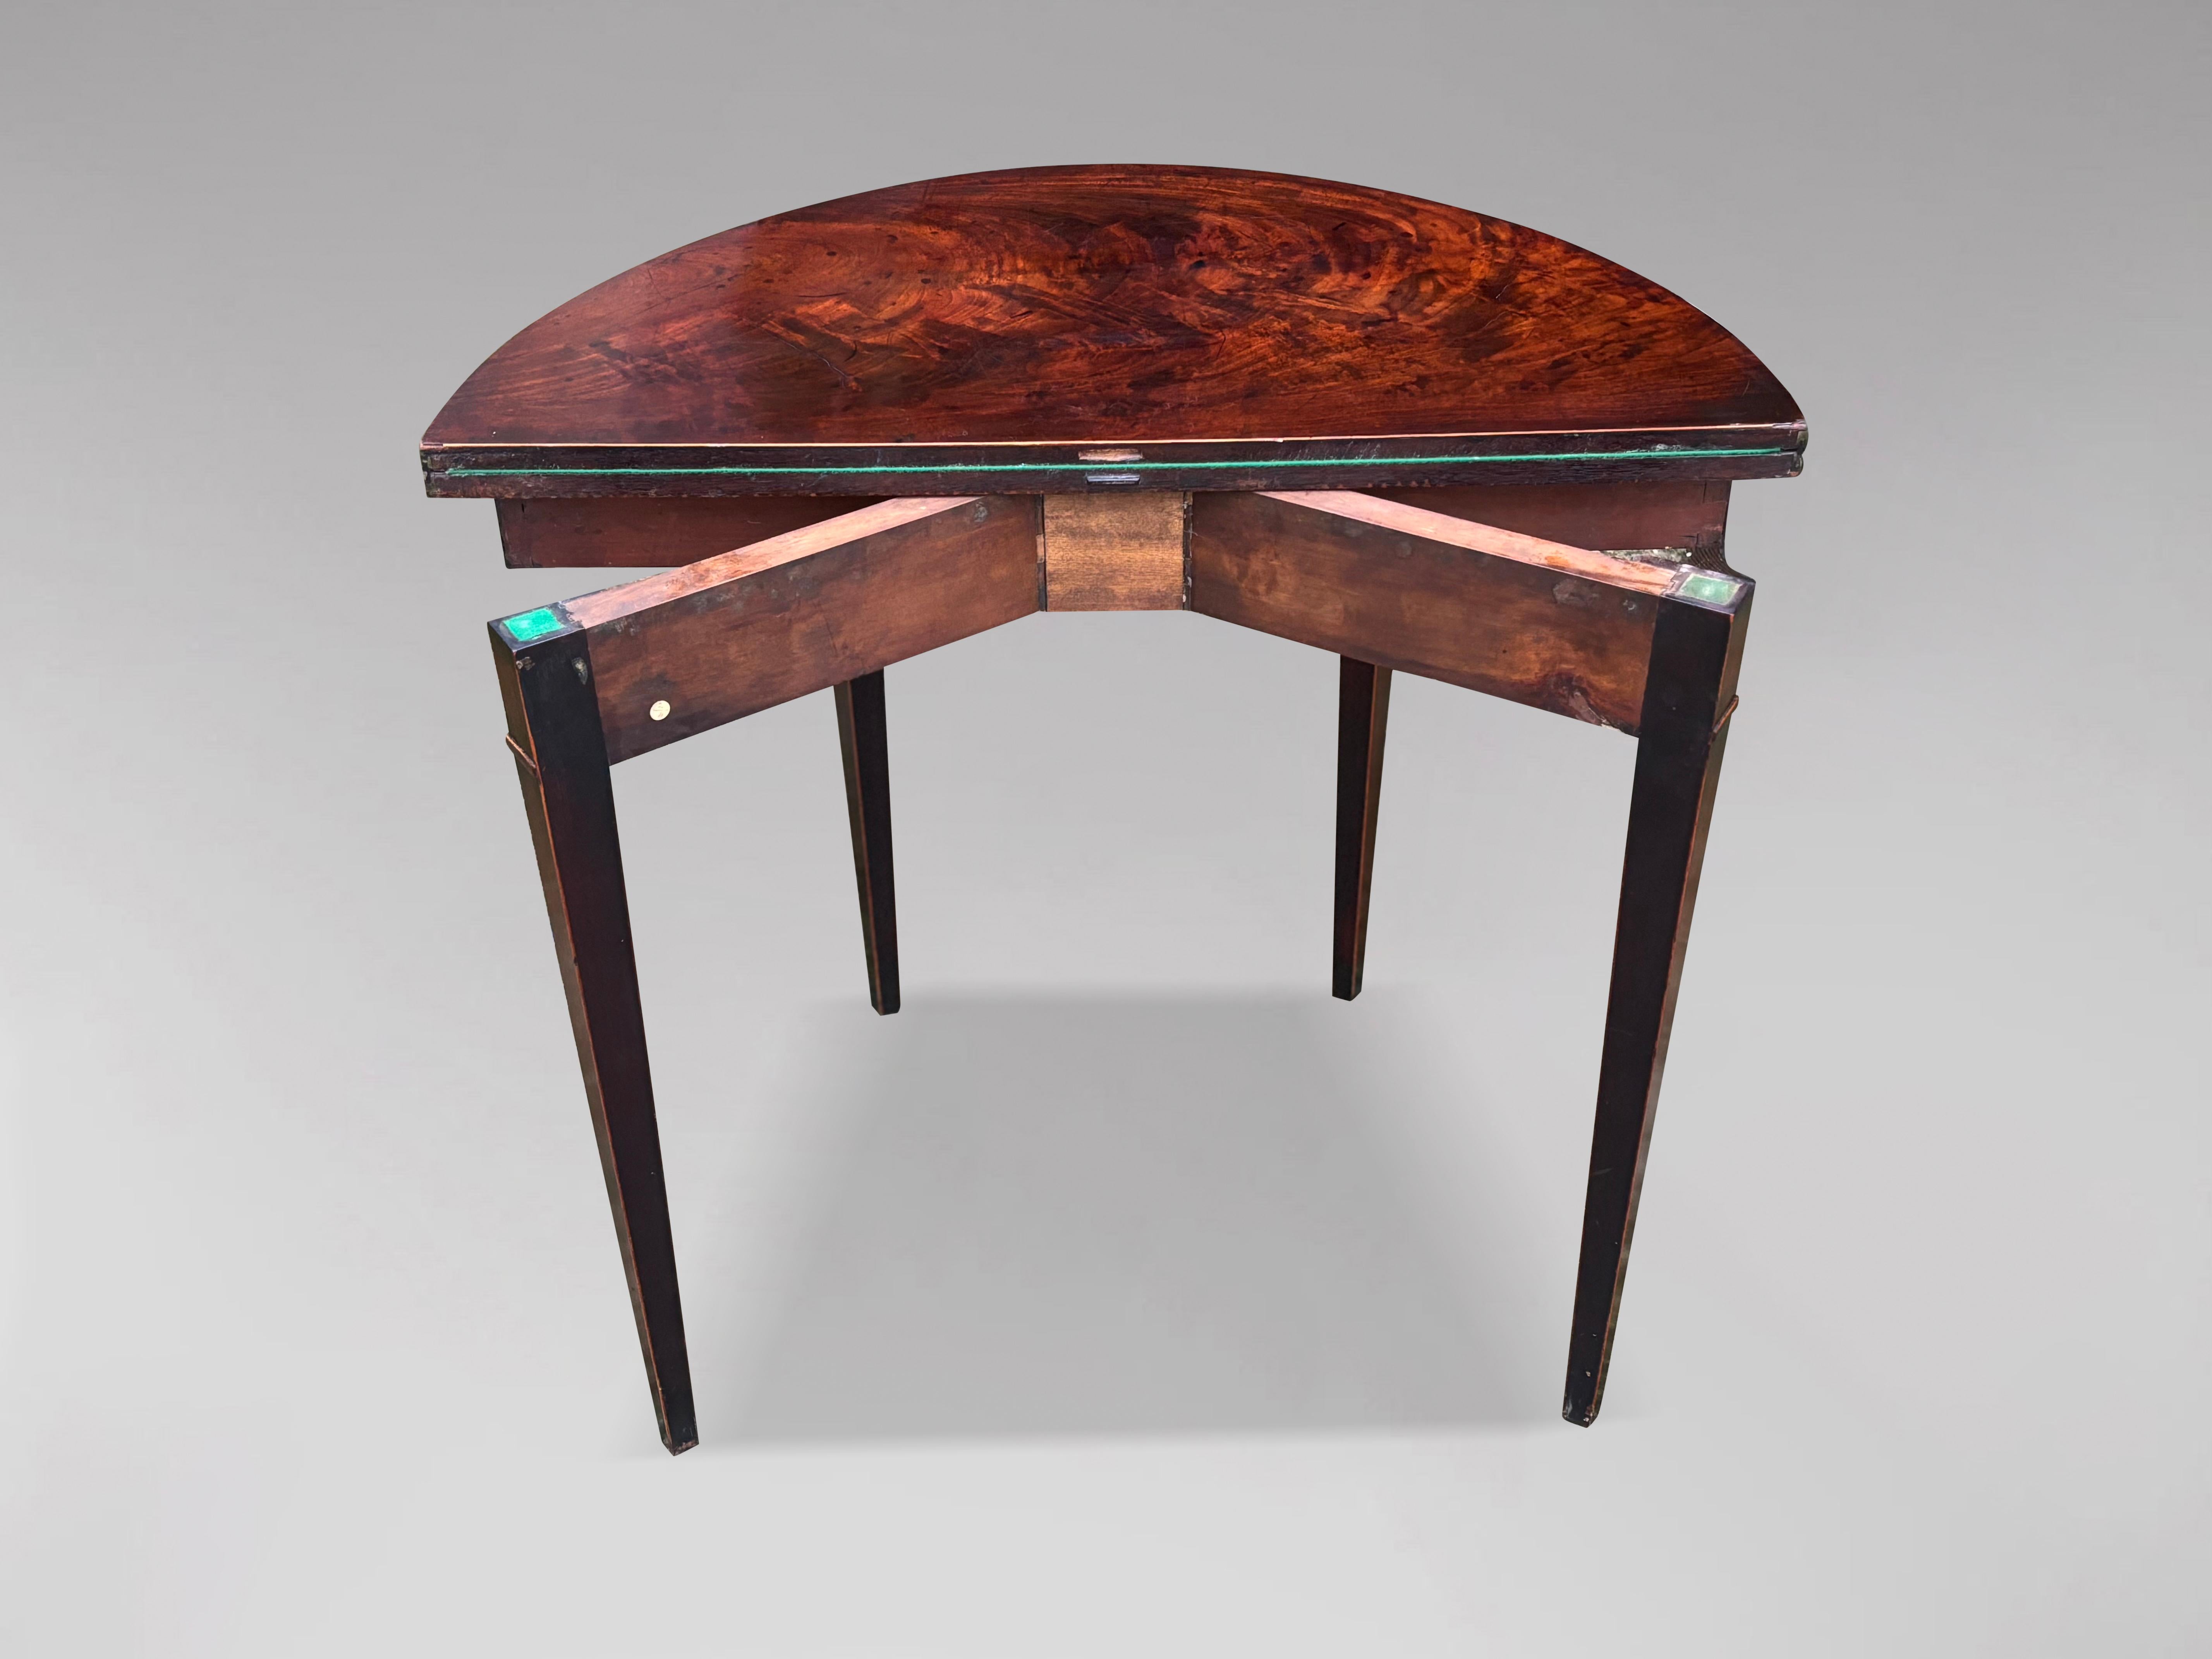 18th Century George III Period Mahogany Demi Lune Games Table In Good Condition For Sale In Petworth,West Sussex, GB